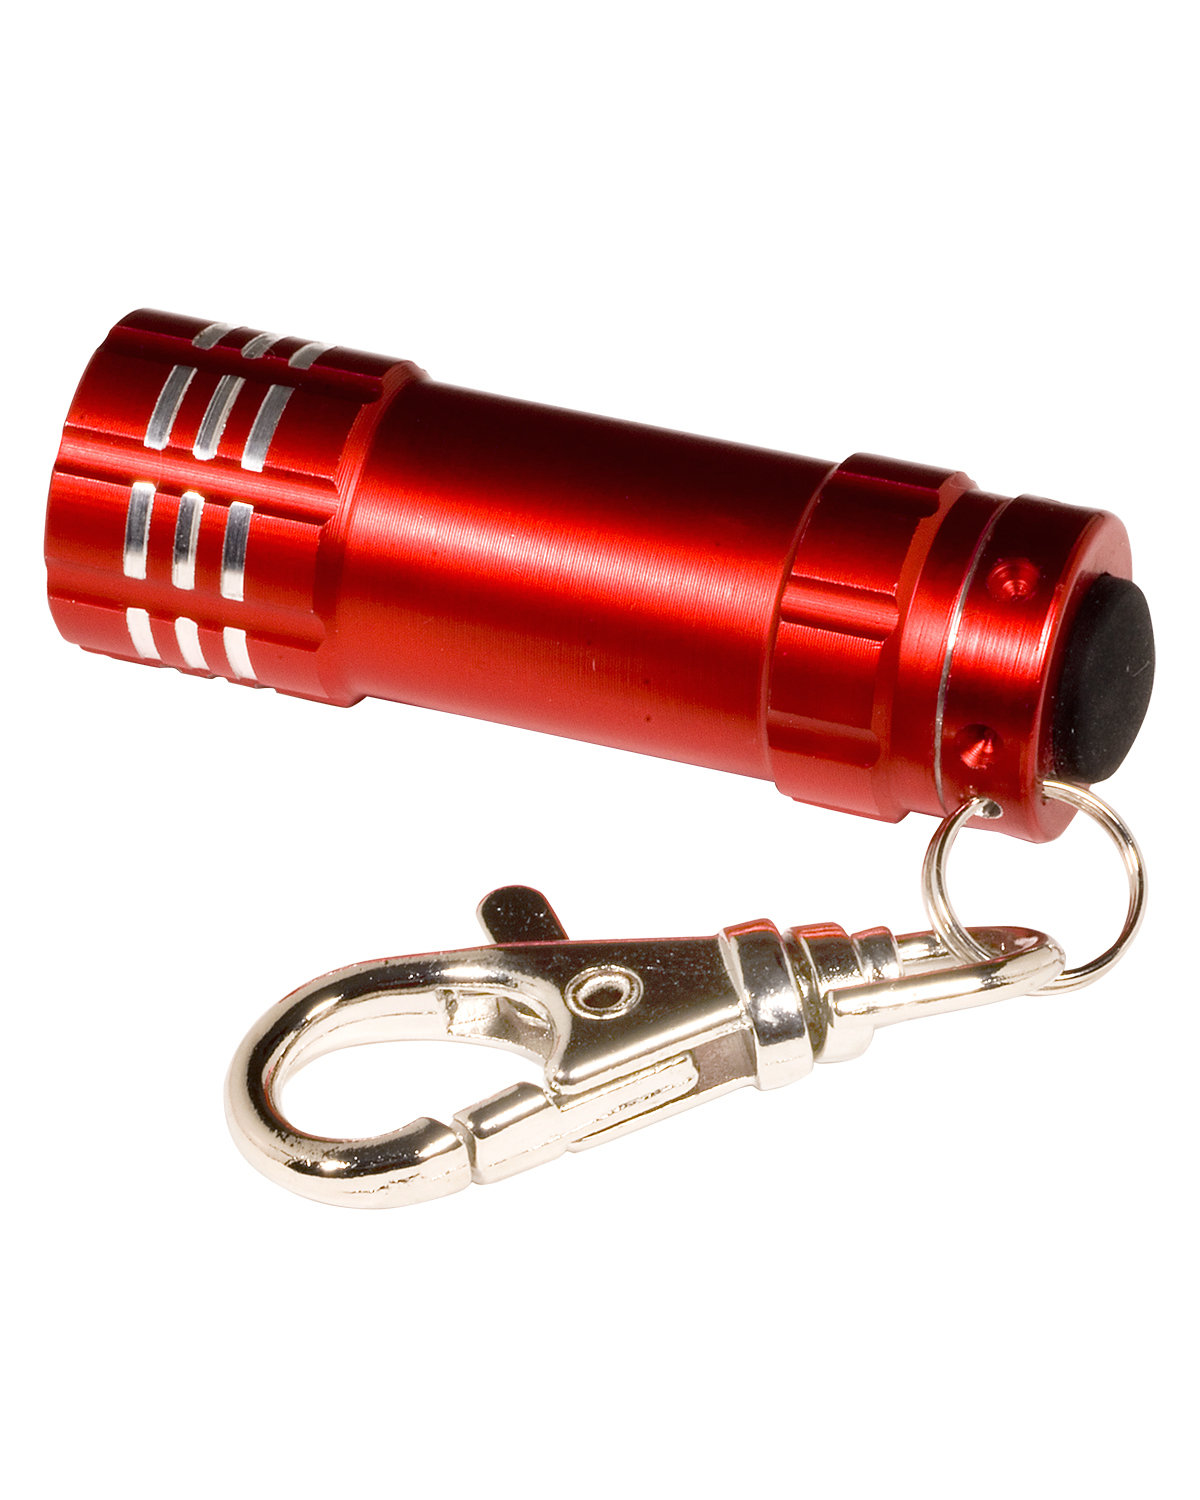 Prime Line Micro 3 Led Torch-Key Holder red 